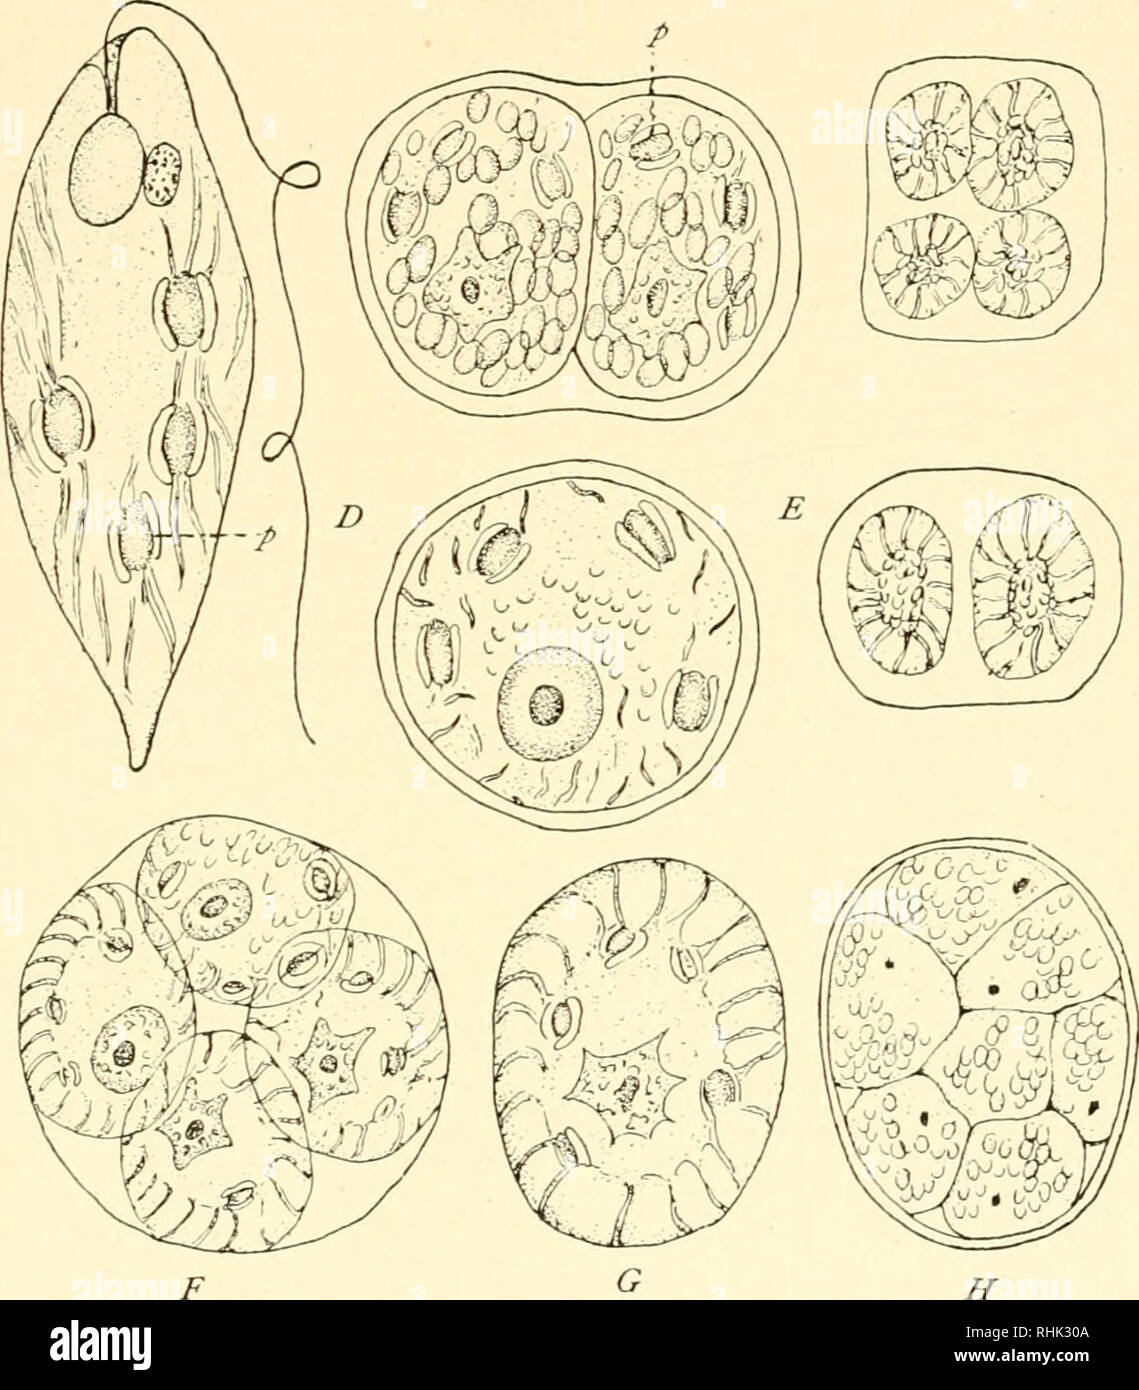 . The biology of the Protozoa. Protozoa; Protozoa. REPRODUCTION 209 are grouped according to the distribution of the three main types of the Protozoa-jNIastigophora, Sarcodina and Infusoria. A. Division and Reorganization in Mastigophora.—With very few exceptions division in flagellates is longitudinal, beginning as a rule at the anterior or flagellar end, the cleavage plane passing down through the middle of the body. As the halves separate the two daughter cells usually come to lie in one plane so that final division. Fig. 95.—Euglena nociahilis Dang. Vegetative individual (A) and simple and Stock Photo